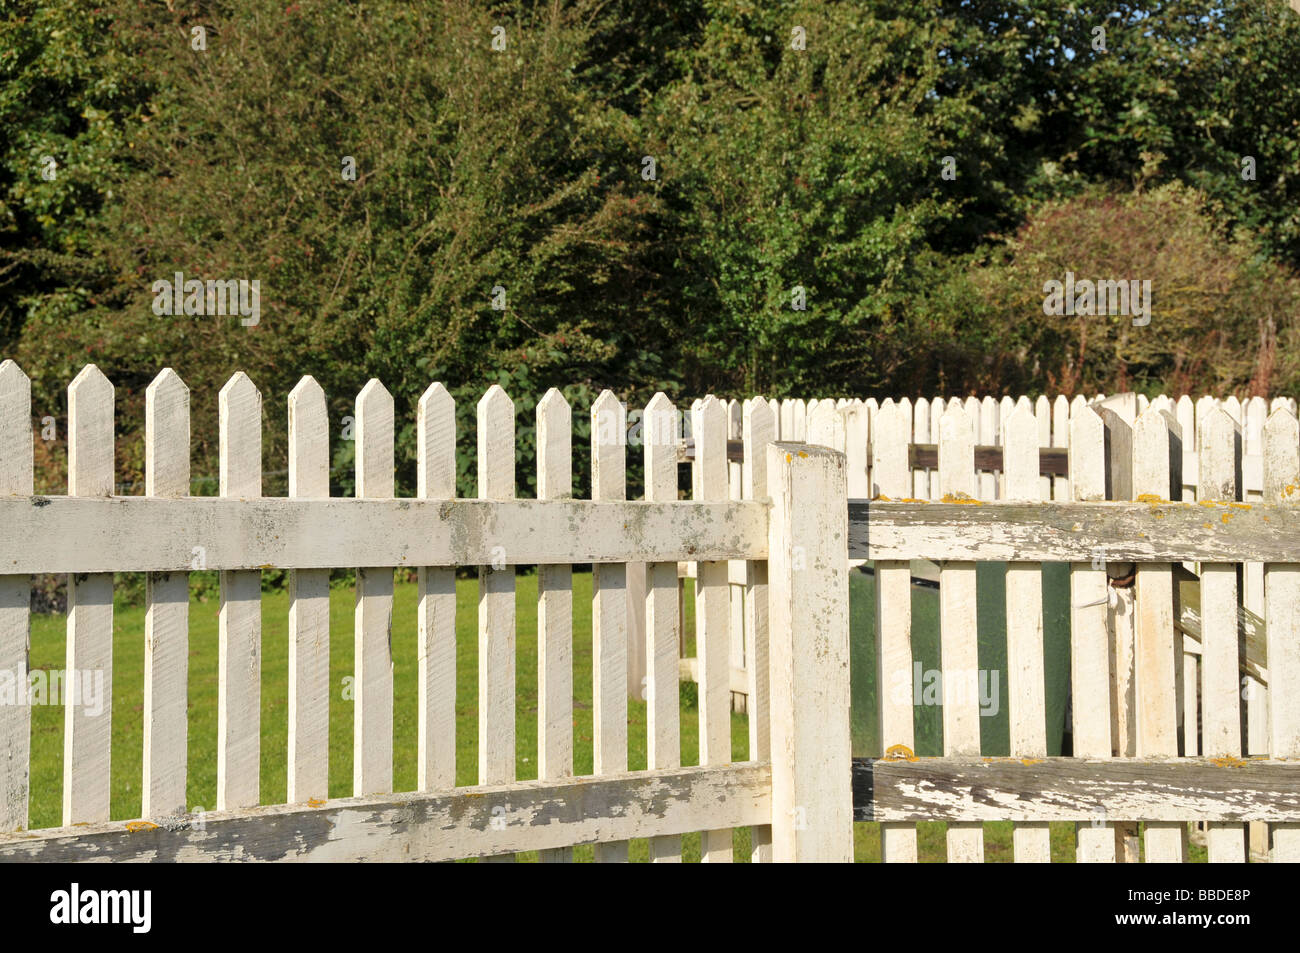 Fence with white color, outdoor Stock Photo